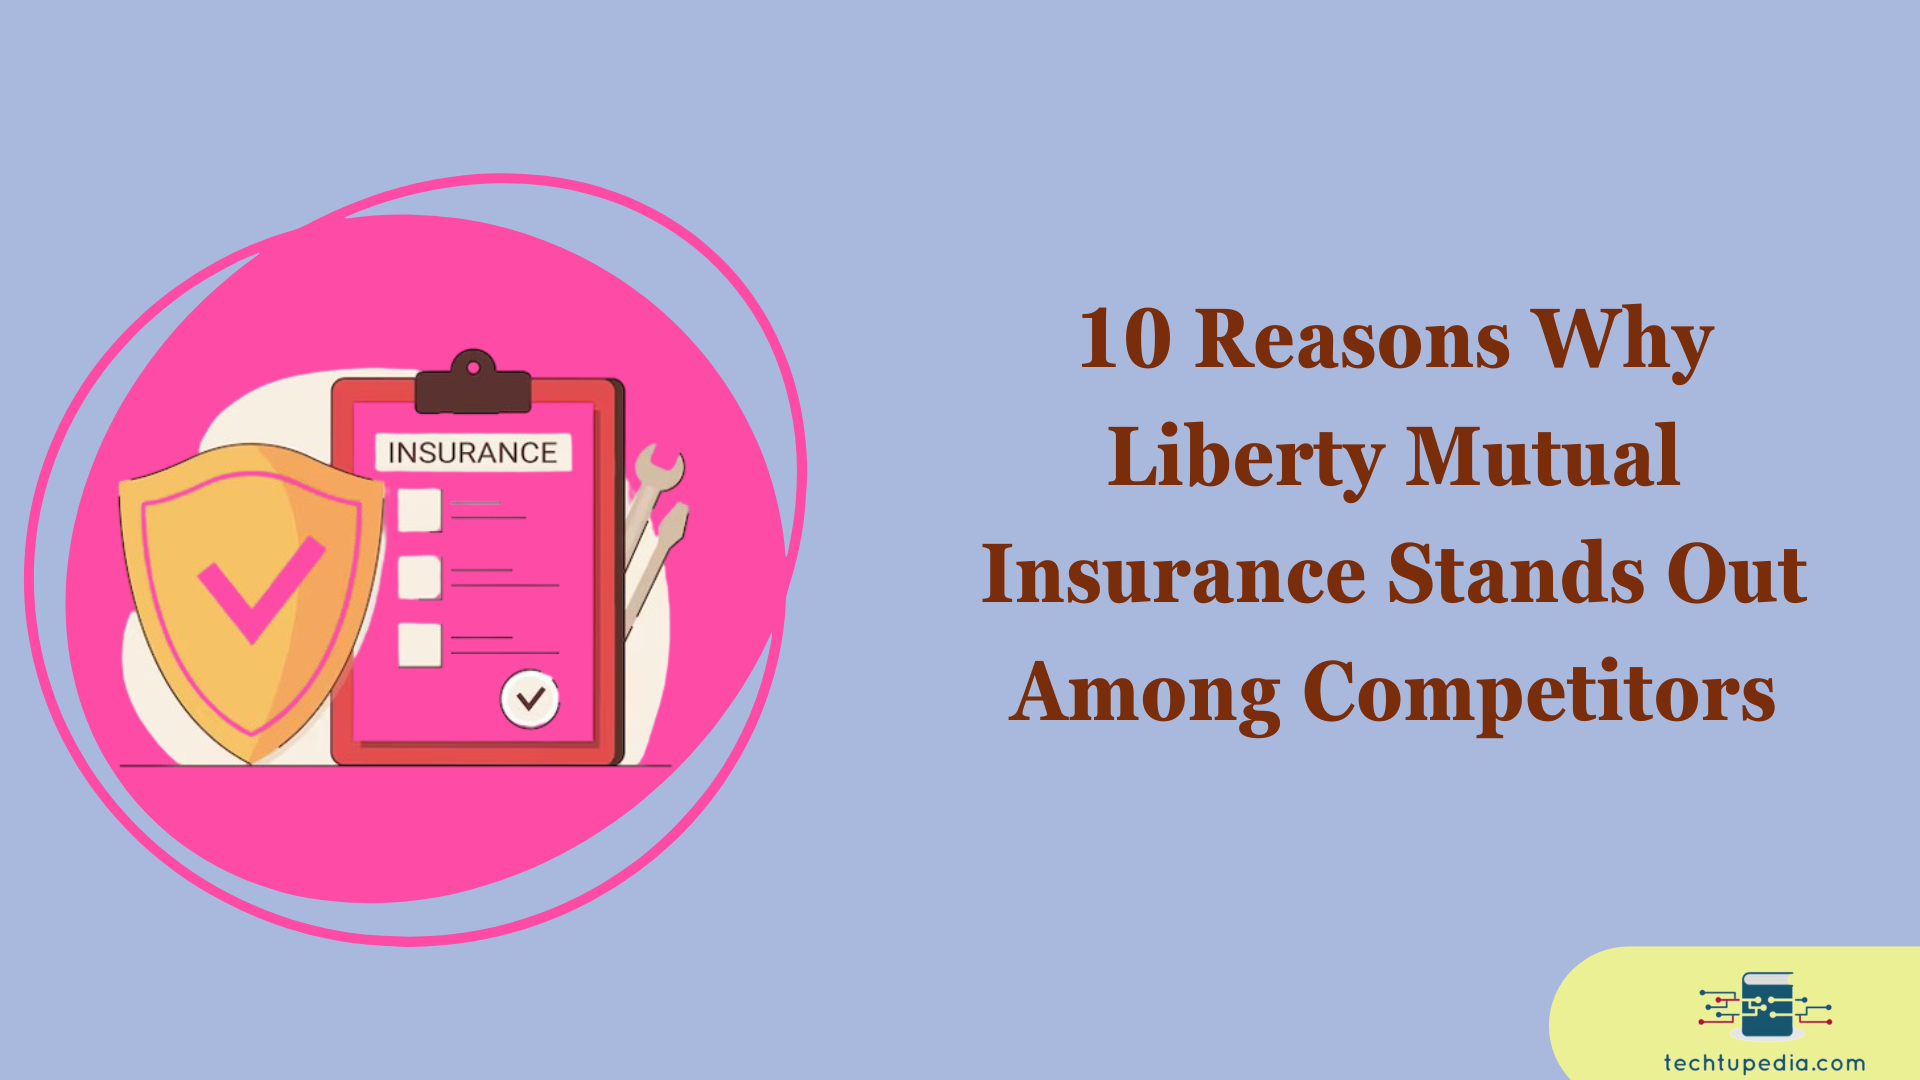 10 Reasons Why Liberty Mutual Insurance Stands Out Among Competitors